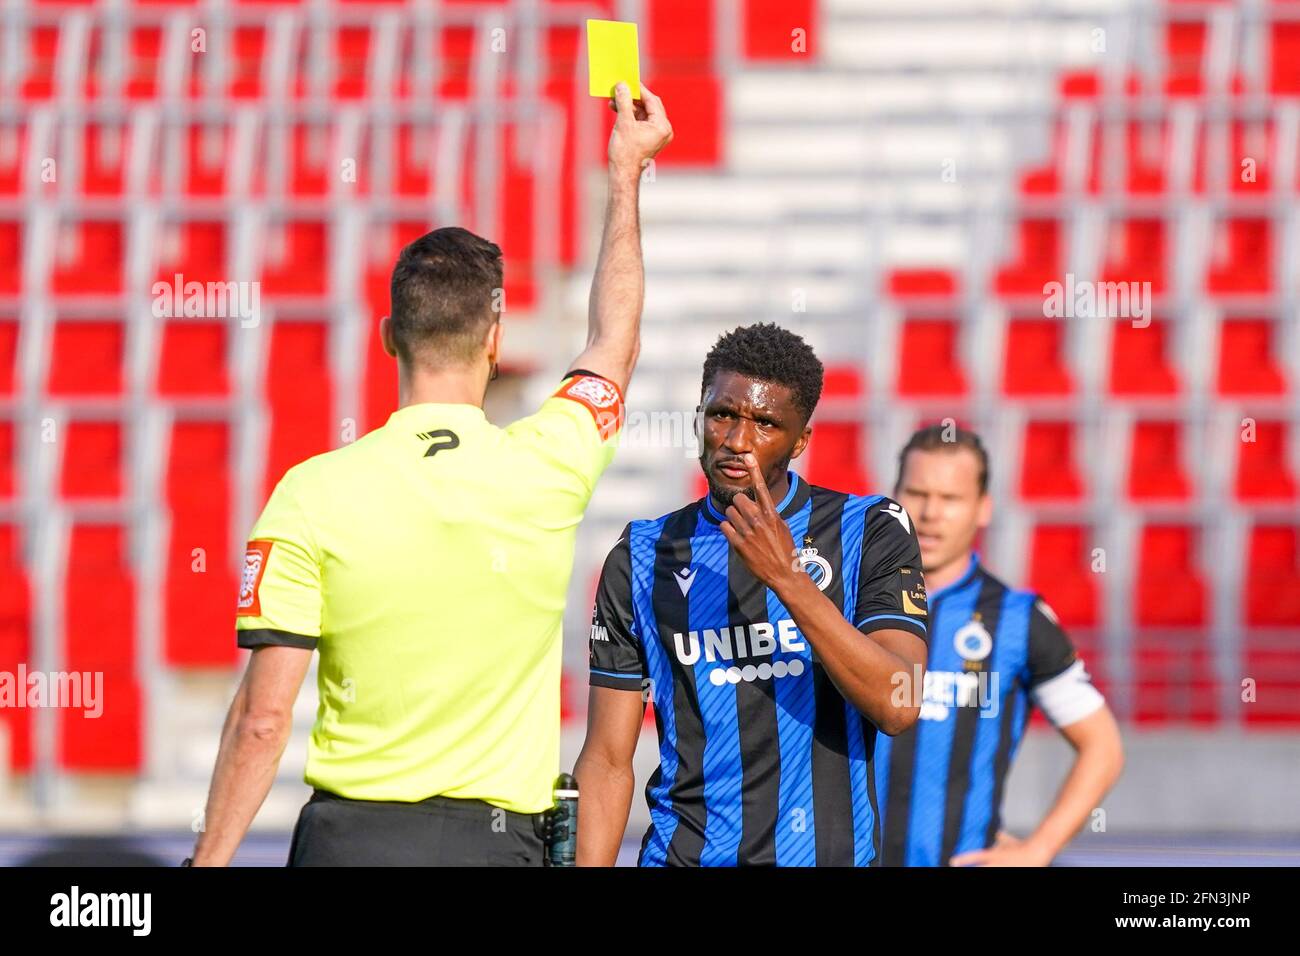 ANTWERP, BELGIUM - MAY 13: Clinton Mata of Club Brugge receiving a yellow card by referee Bram van Driessche during the Jupiler Pro League match betwe Stock Photo